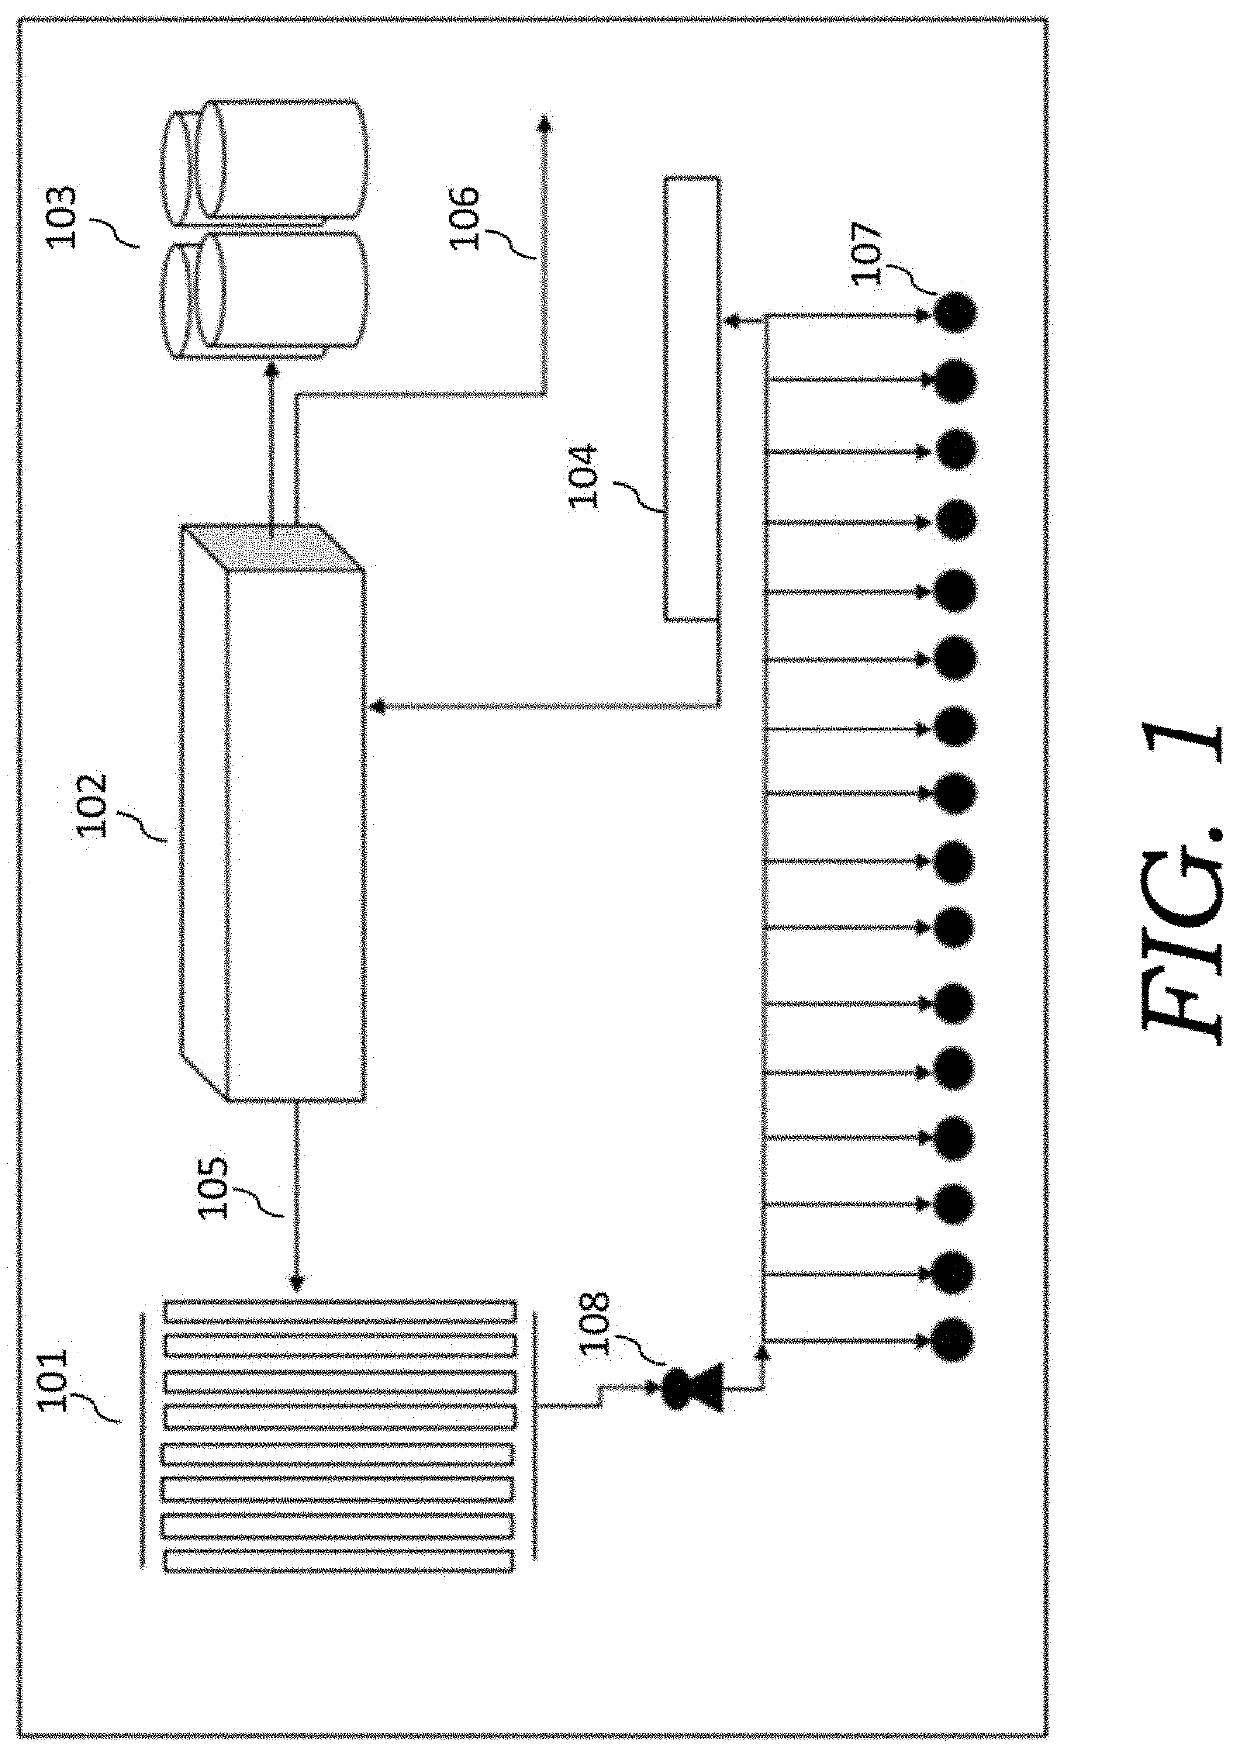 System and method for optimized production of hydrocarbons from shale oil reservoirs via cyclic injection